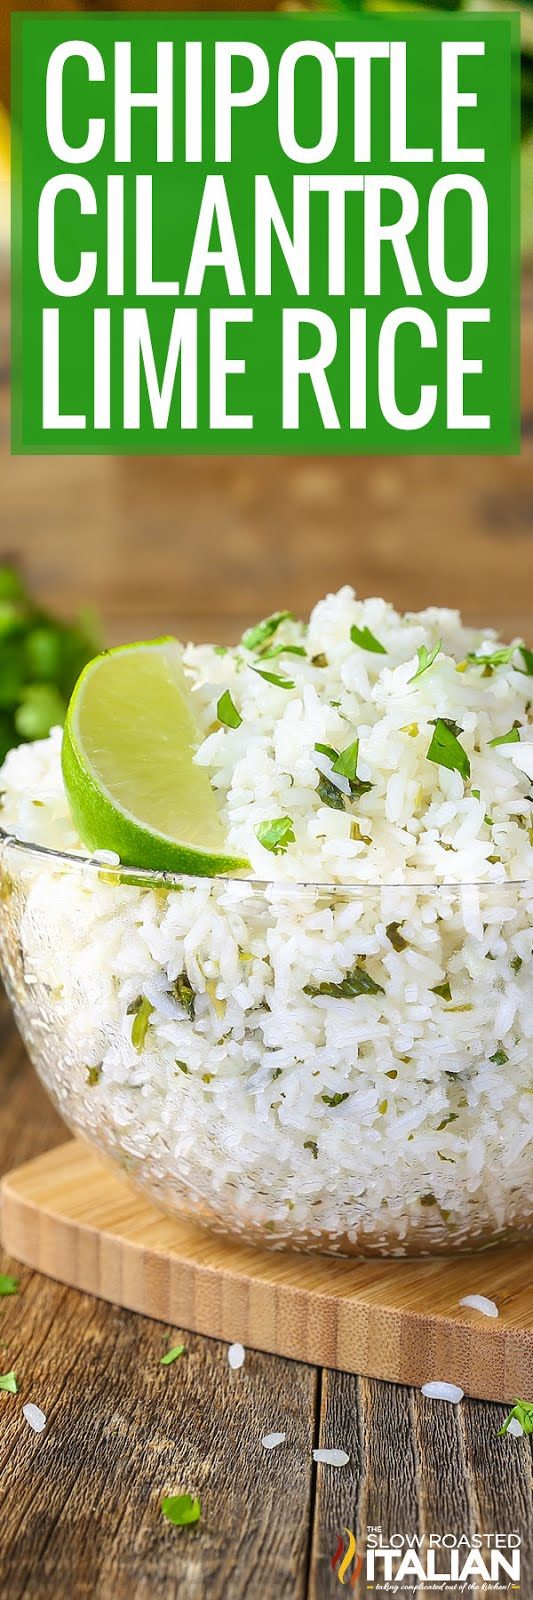 titled image (and shown): chipotle cilantro lime rice